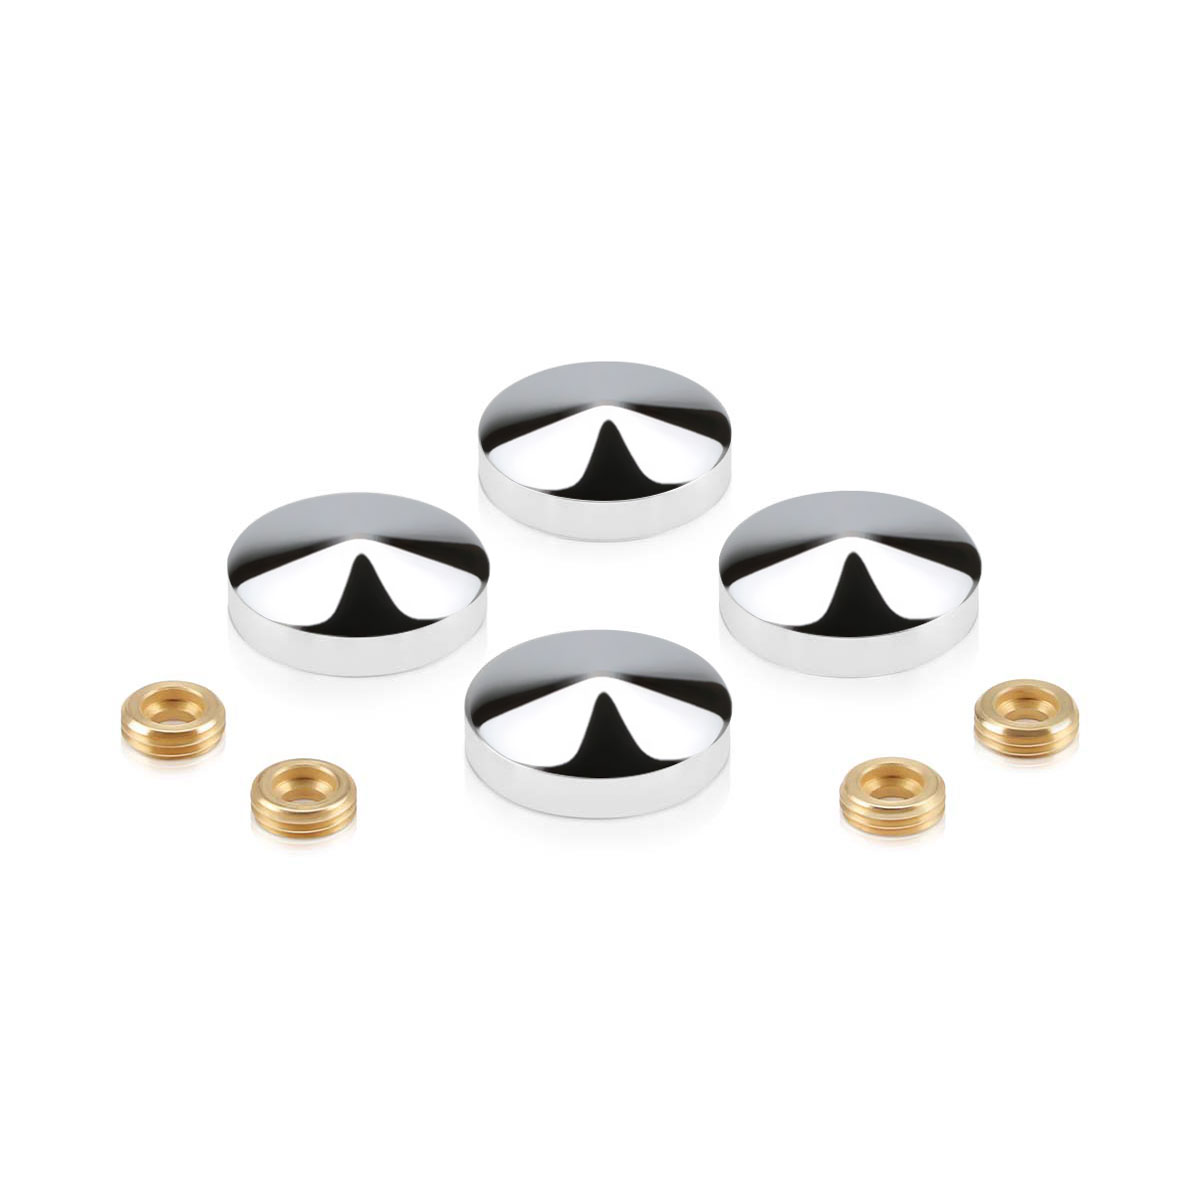 Set of Conical Screw Cover Diameter 1'', Polished Stainless Steel Finish (Indoor or Outdoor)